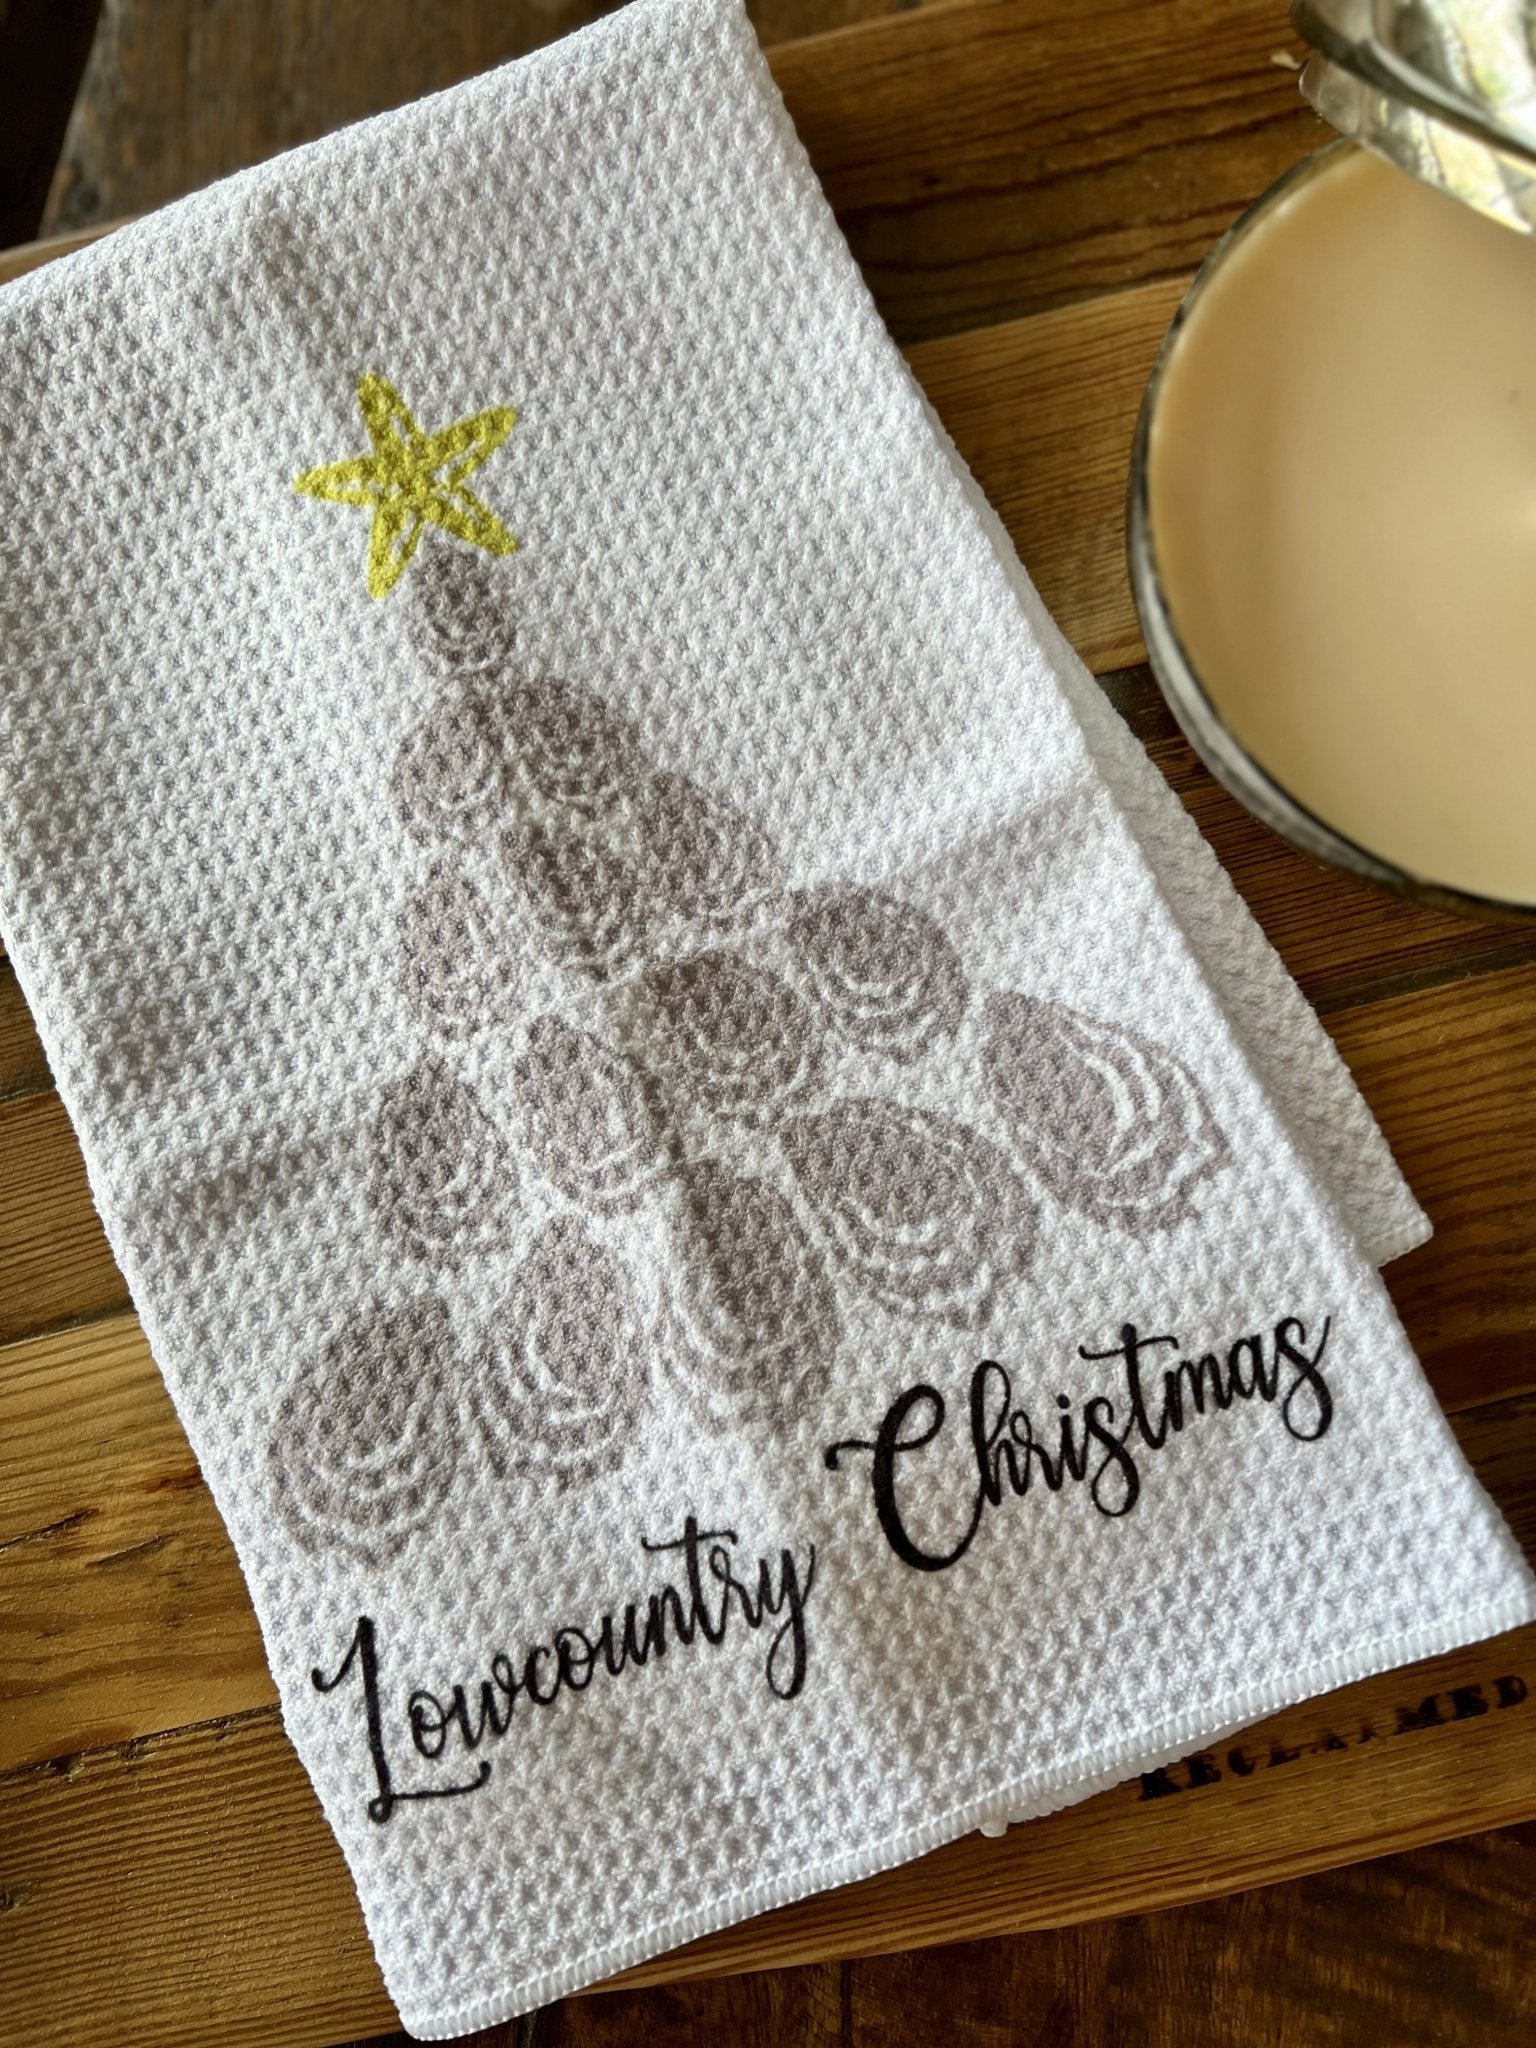 Holy City Creations Lowcountry Christmas Kitchen Towel